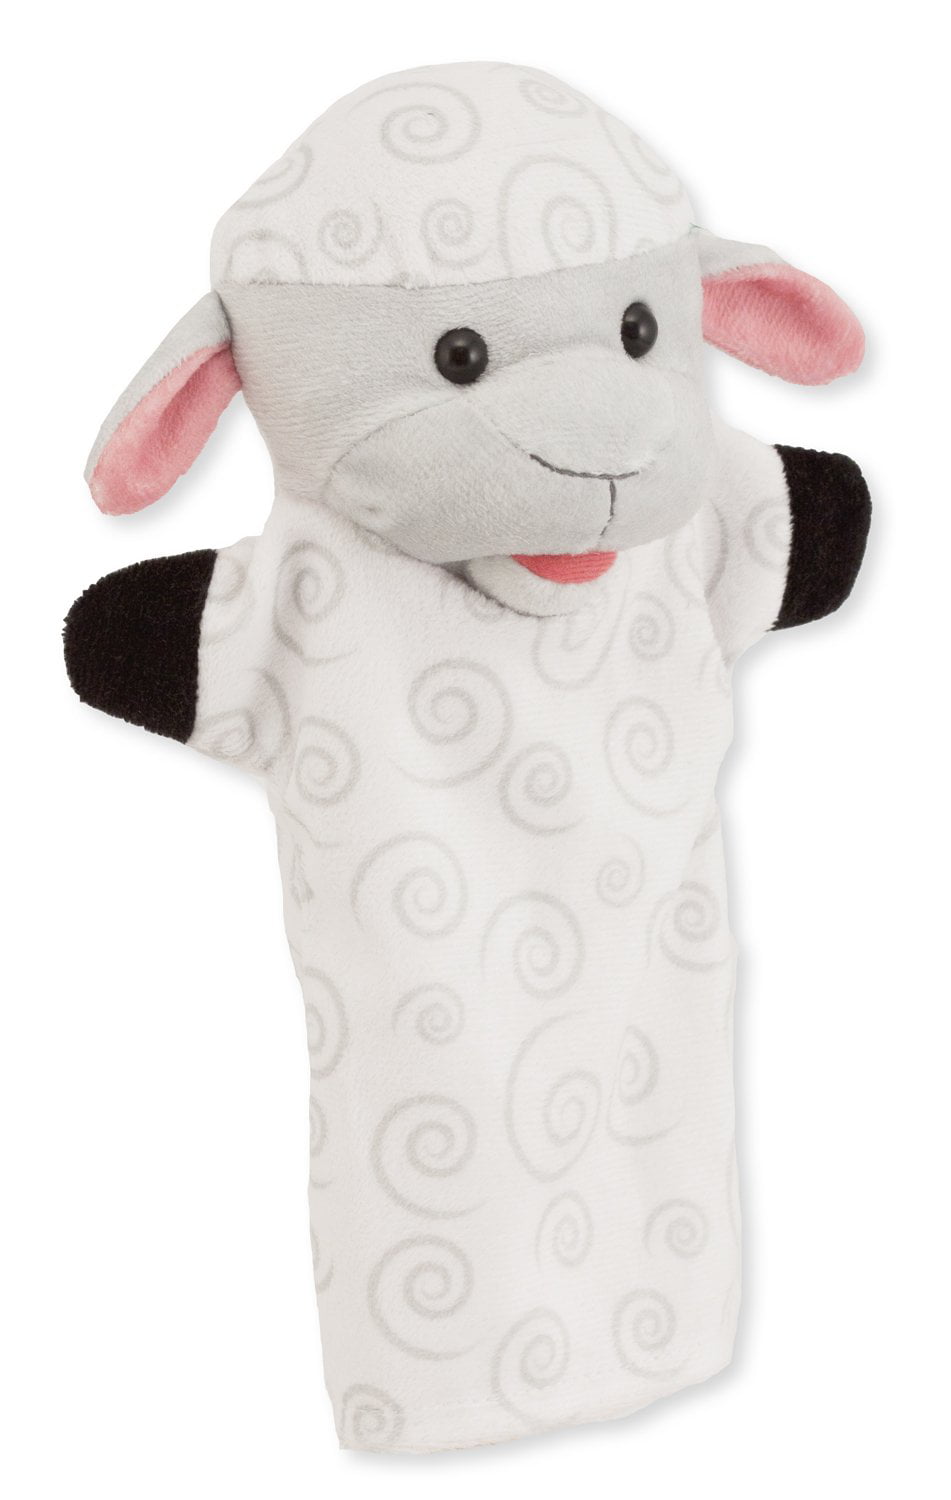 Melissa & Doug 4 Cuddly Farm Friends Hand Puppets Pig Cow Horse Sheep 2 for sale online 